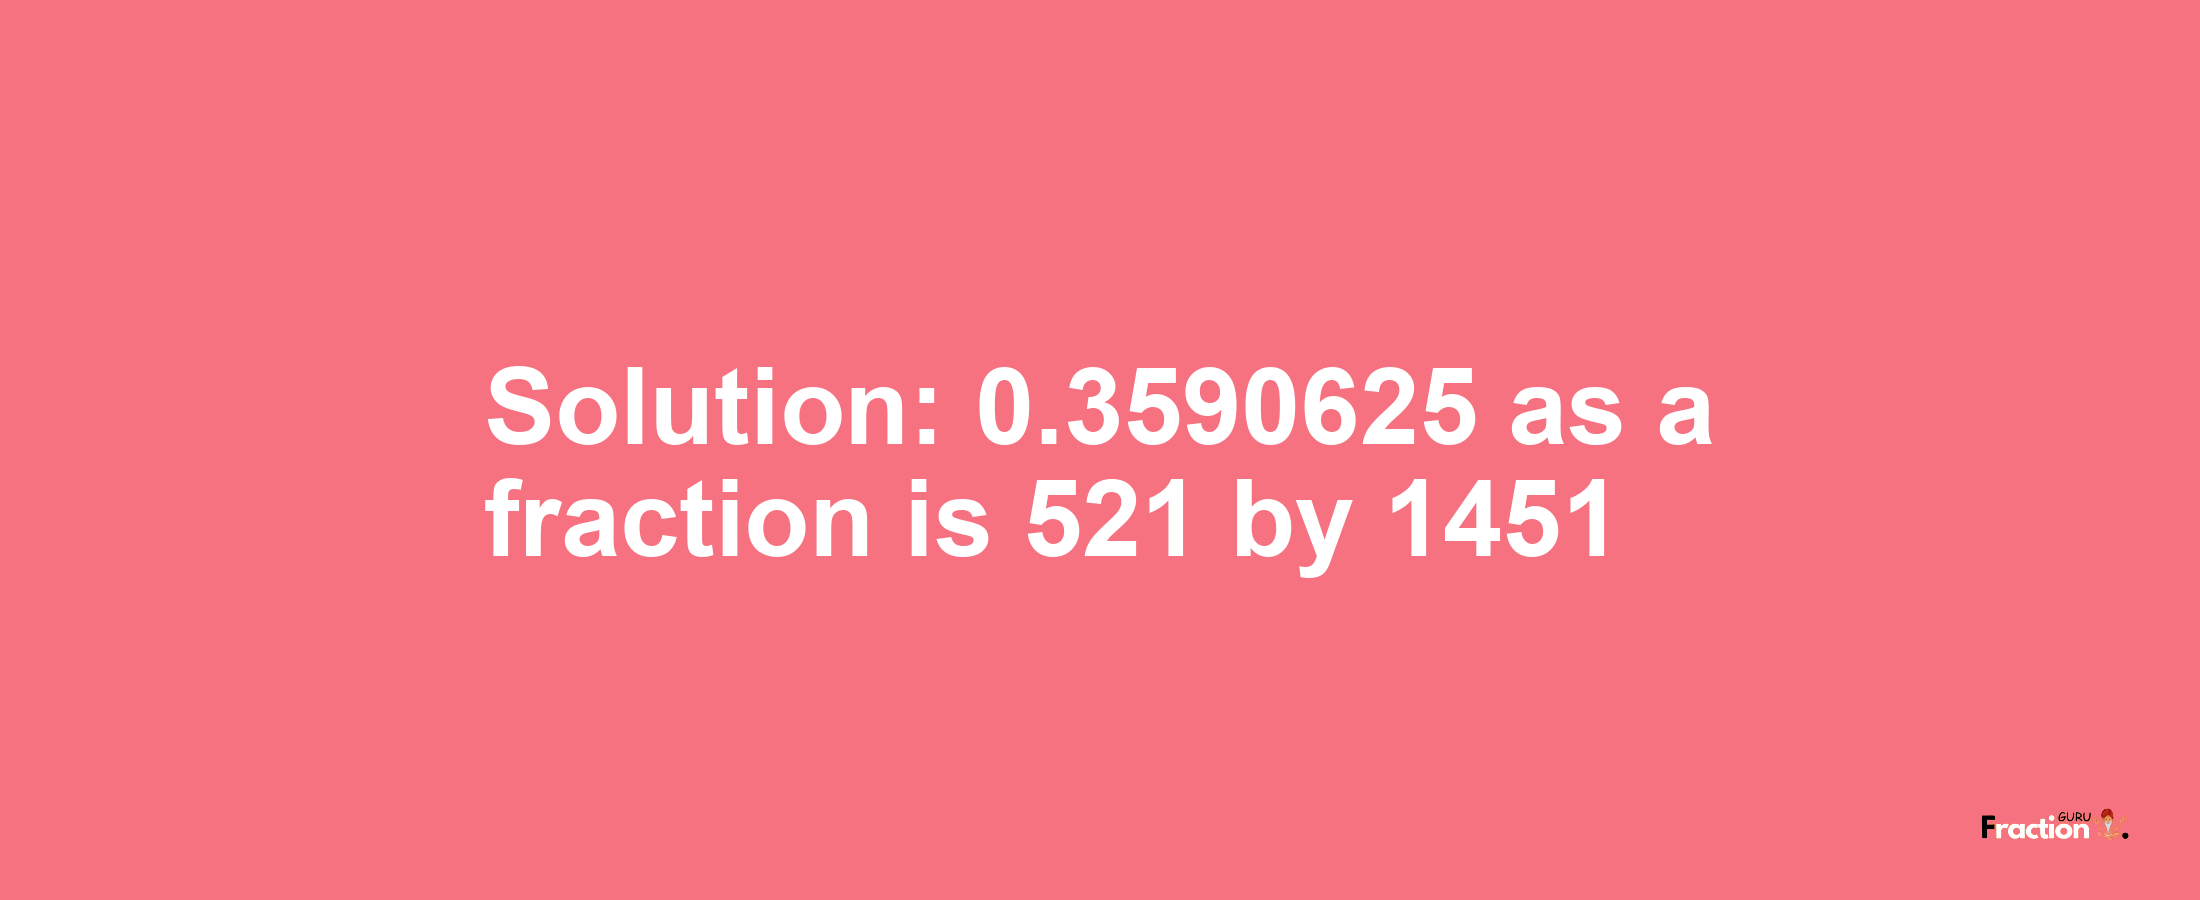 Solution:0.3590625 as a fraction is 521/1451